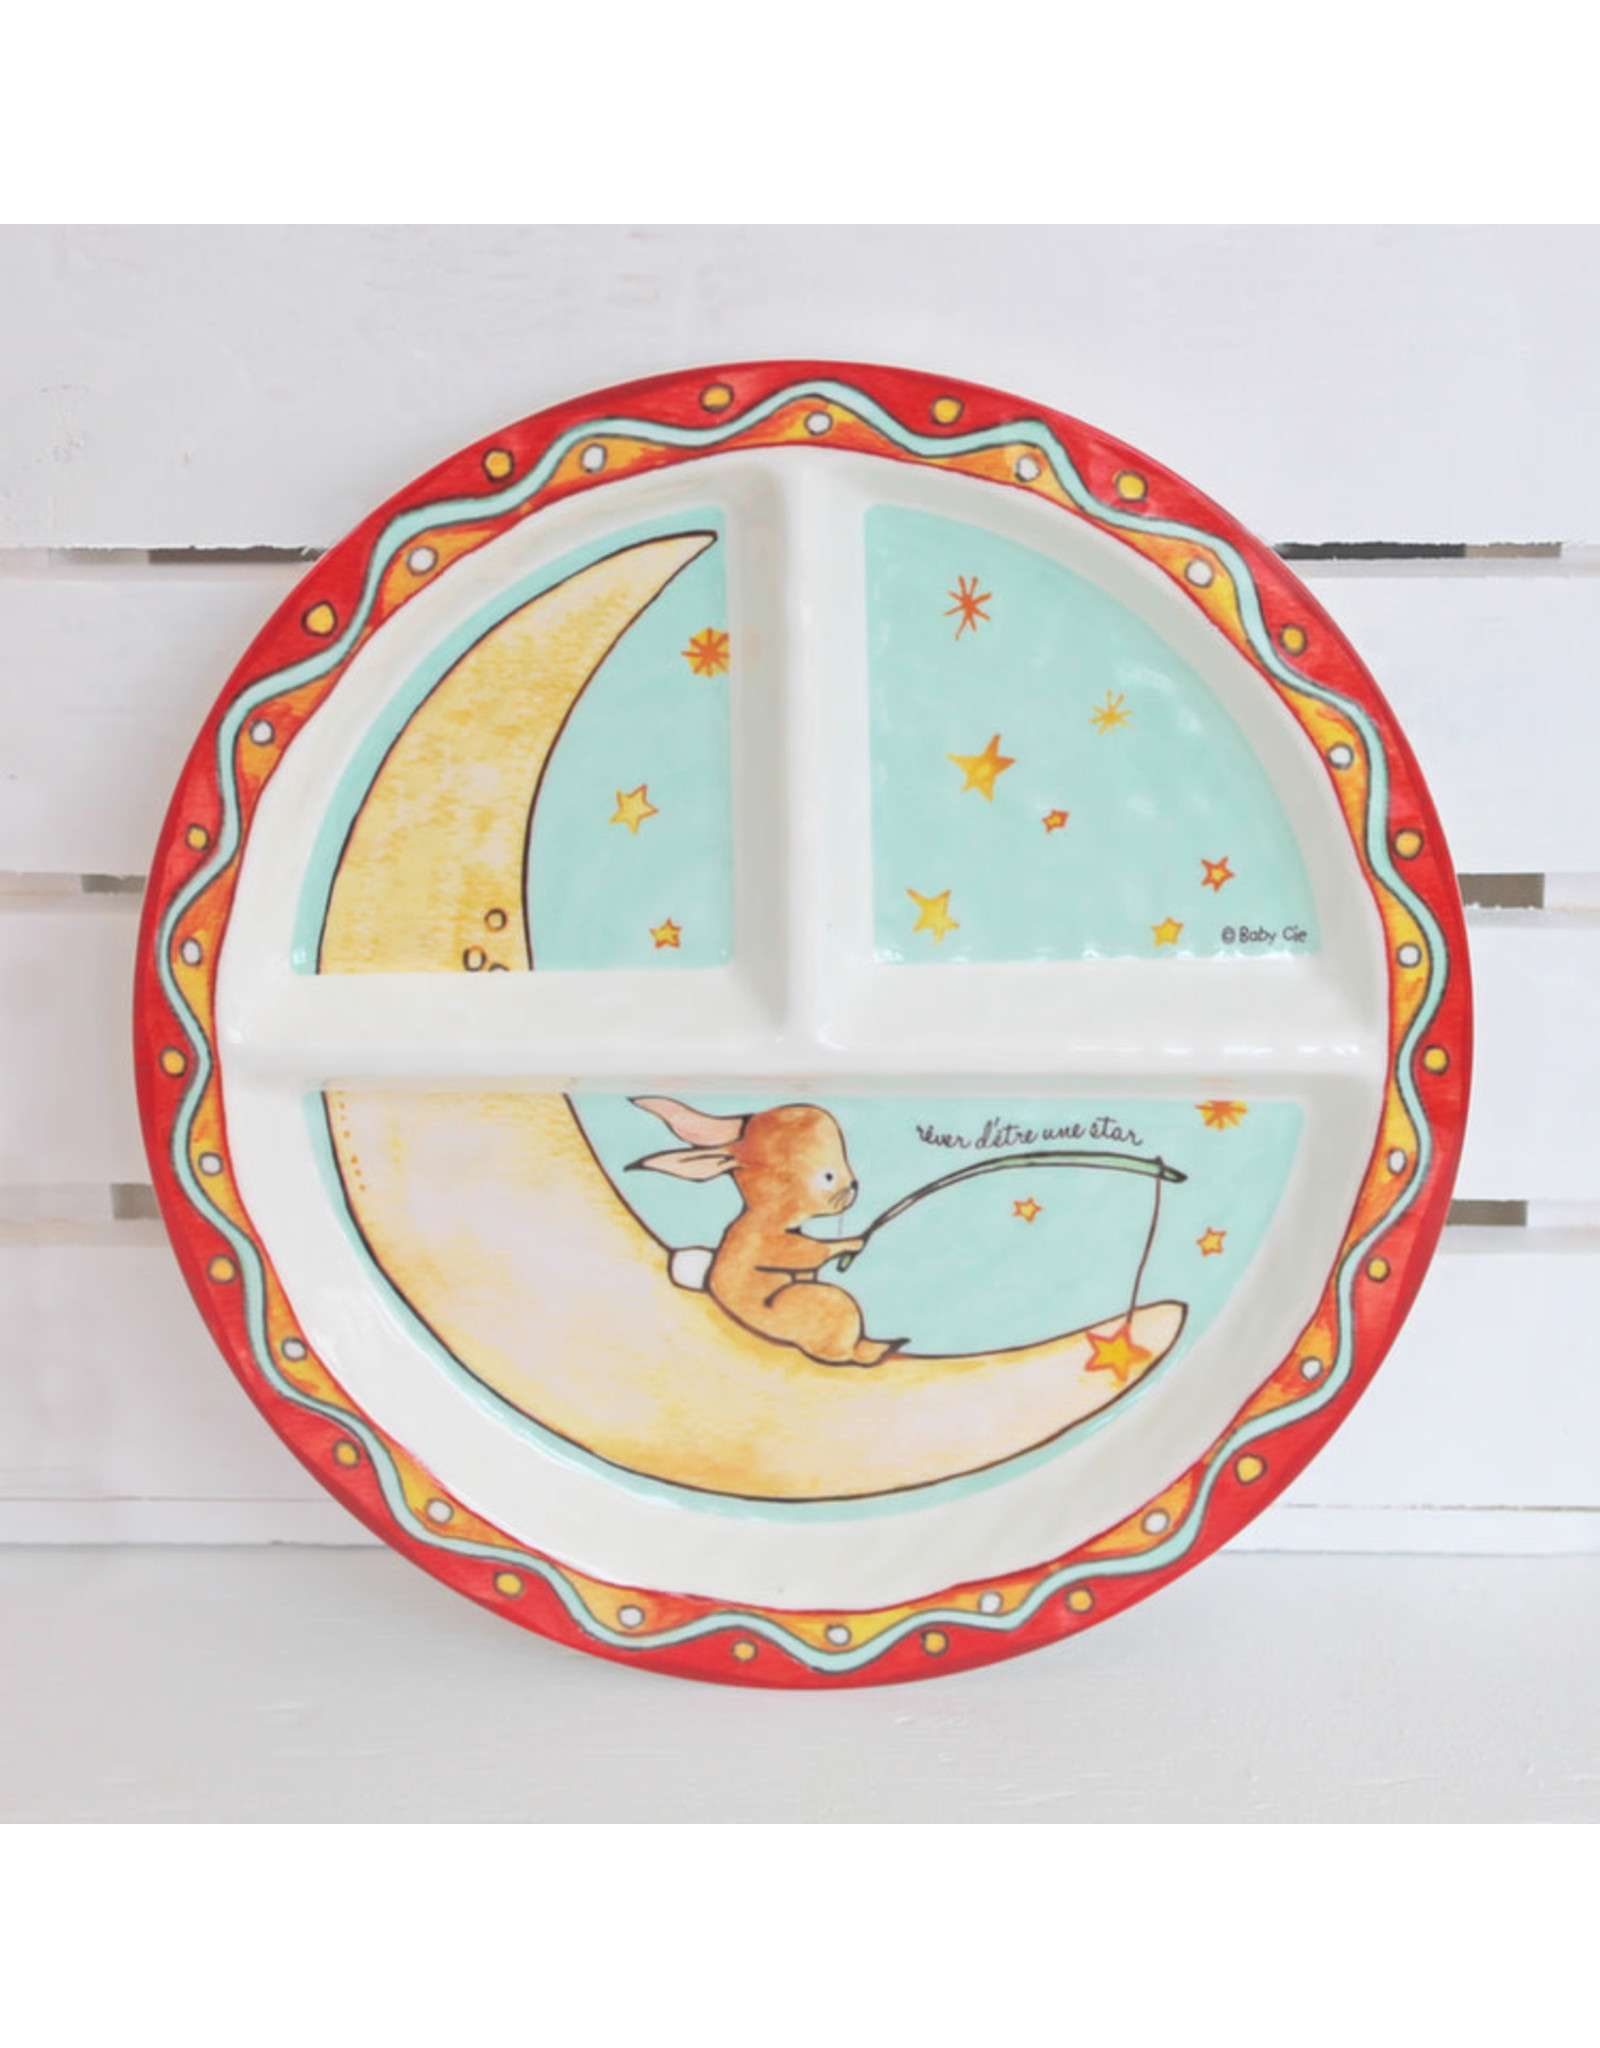 BABY CIE WISH ON A STAR SECTION PLATE